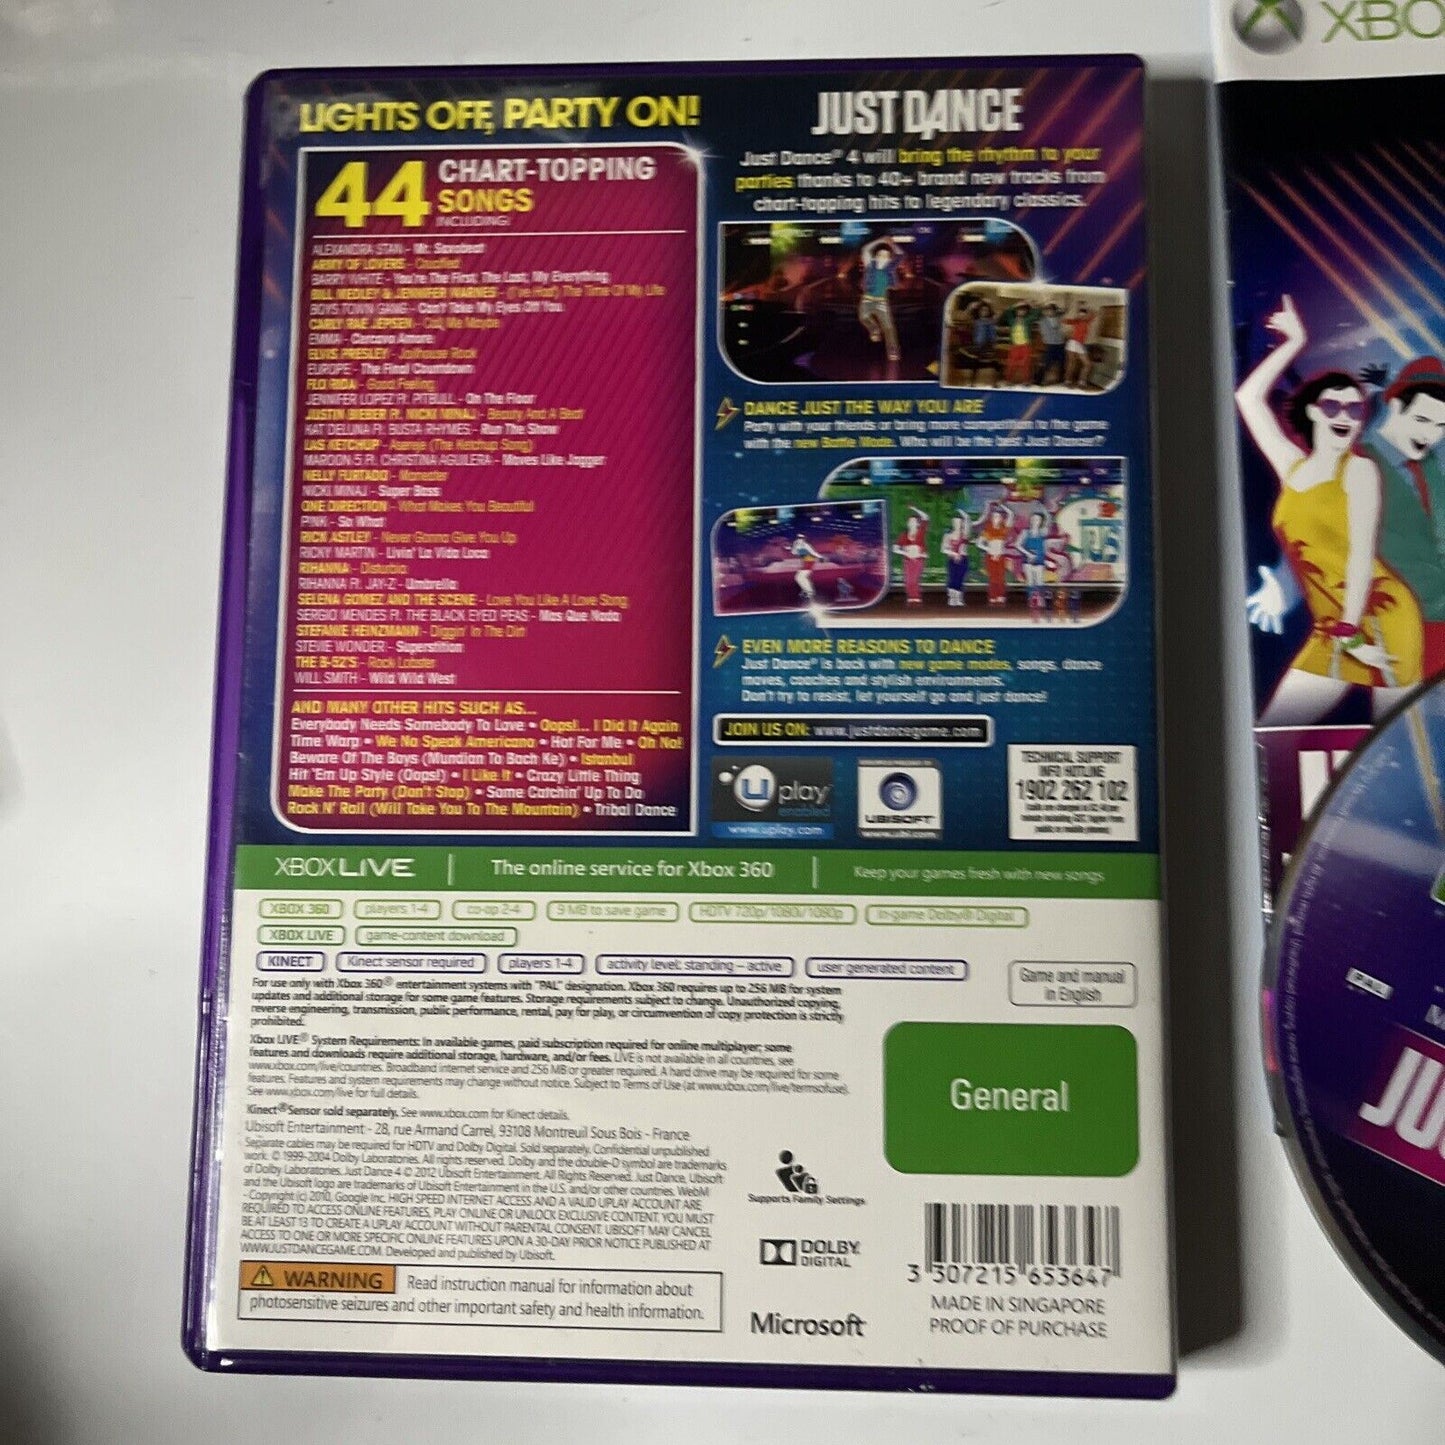 Just Dance 4 Kinect Microsoft XBOX 360 PAL Game With Manual 40+ Hit Tracks Music